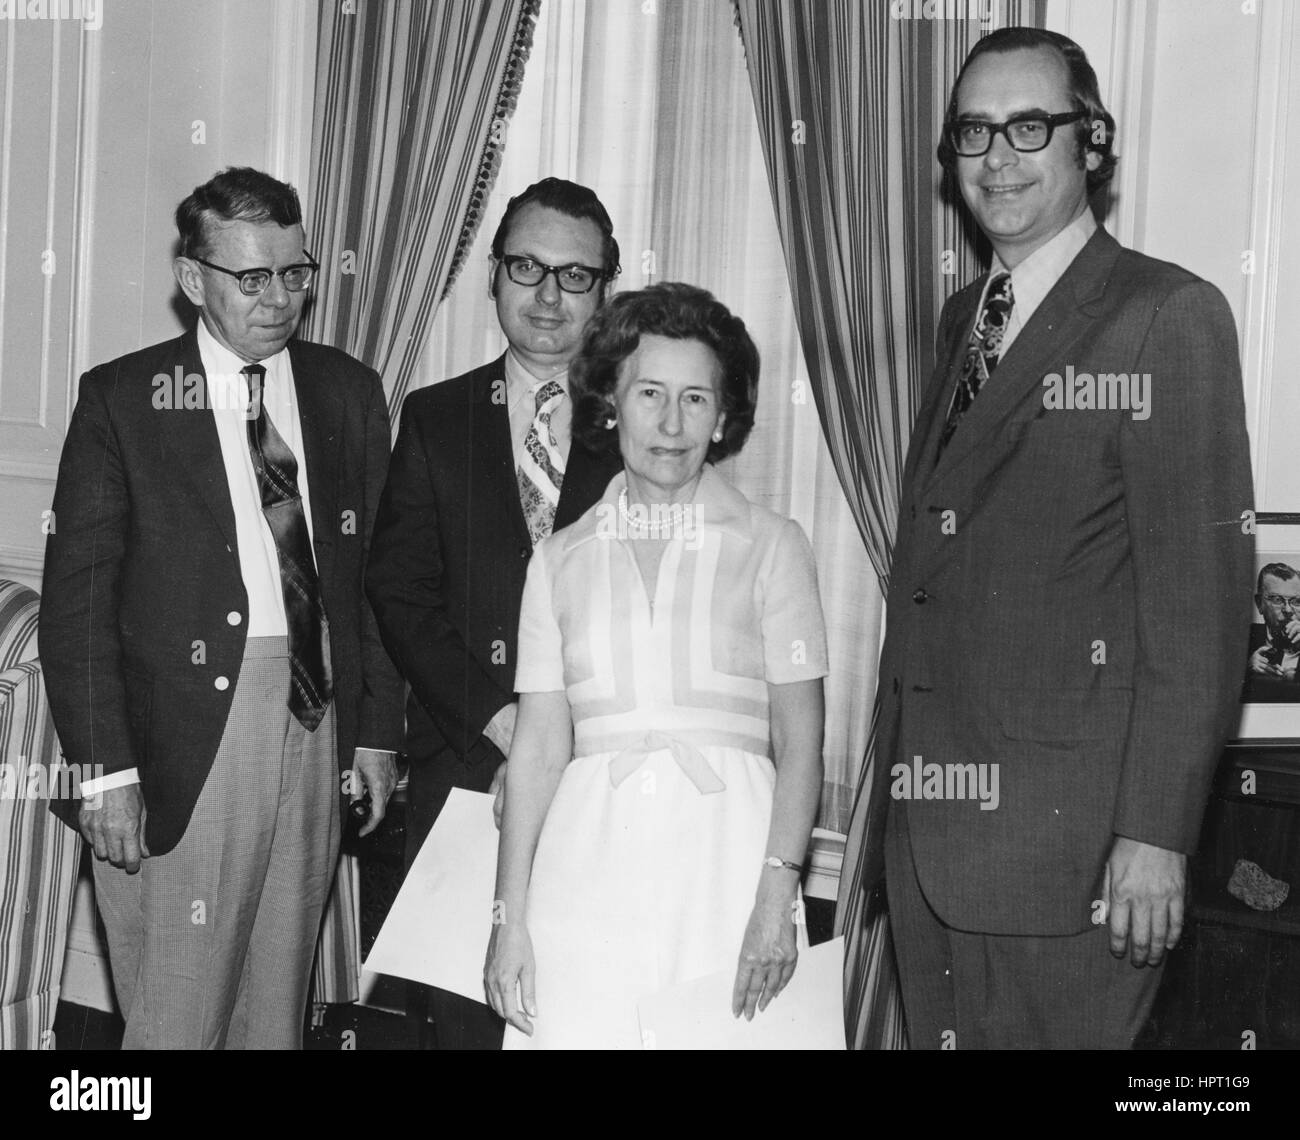 (Left to right): Historians Dr. Edward G. Campbell, Robert M. Kvasnicka, and Jane F. Smith stand with Archivist James B. Rhoads during the Commendable Service Award Ceremony, July 7, 1972. Stock Photo